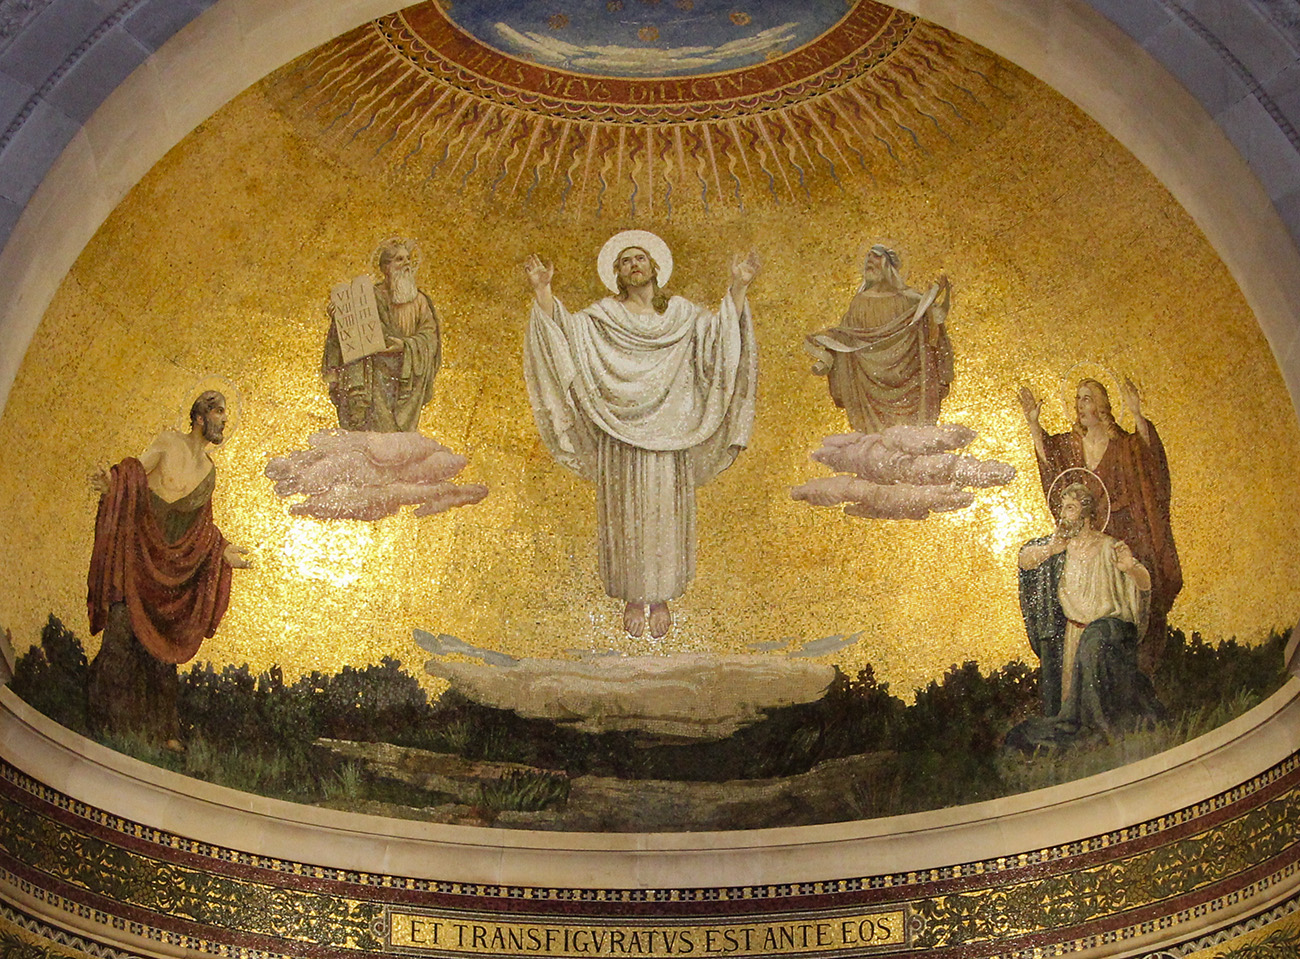 The Transfiguration Reveals Truth “According to His Own Design”